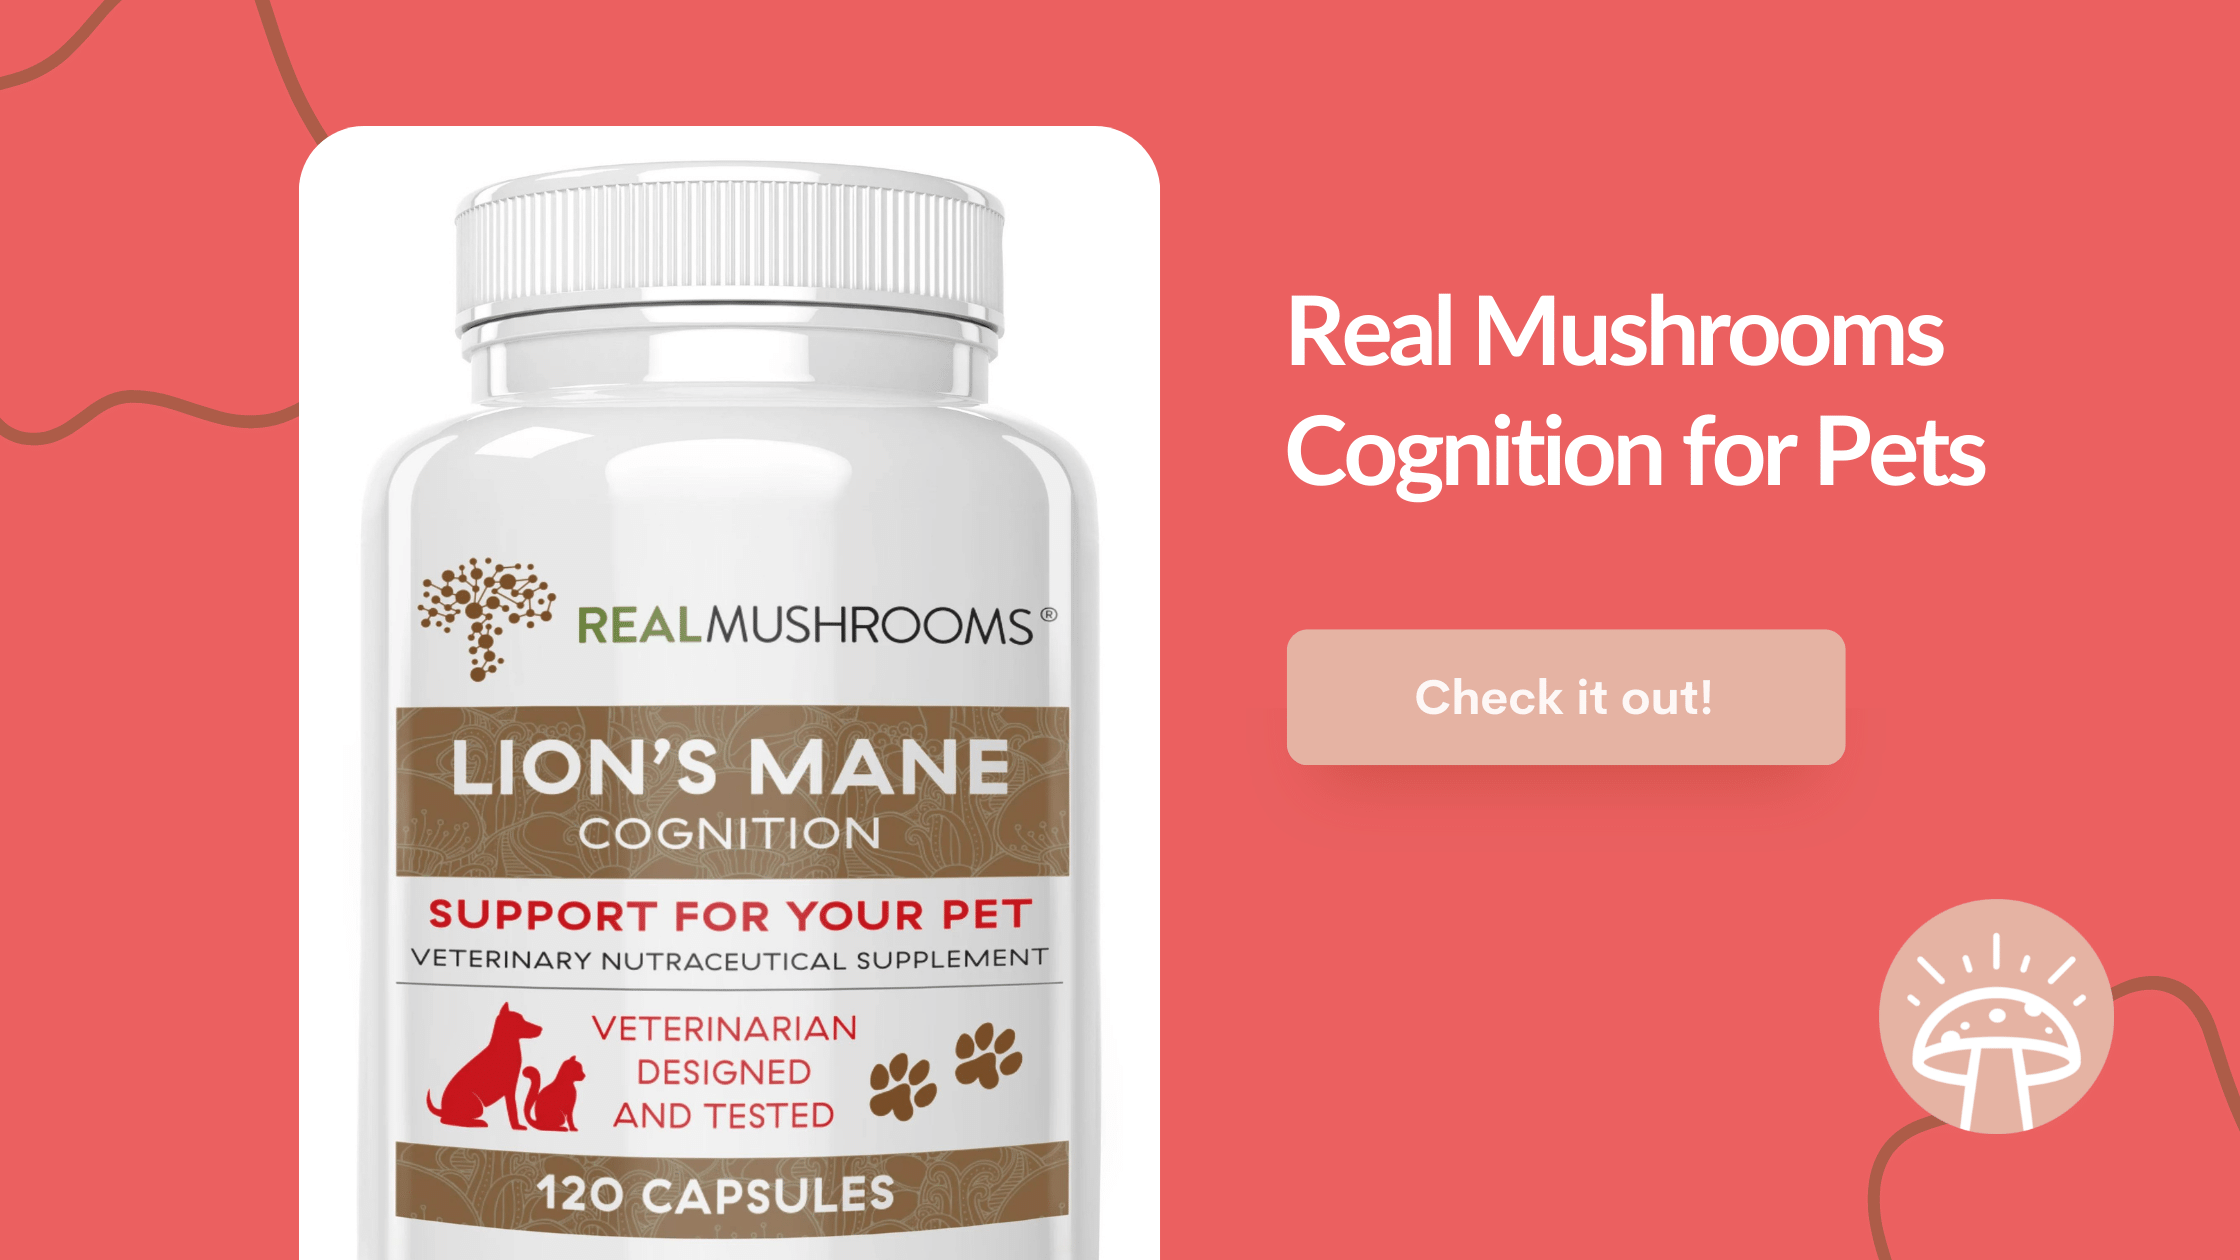 Real Mushrooms Lions Manehttps://shop.realmushrooms.com/products/organic-lions-mane-extract-capsules-for-pets